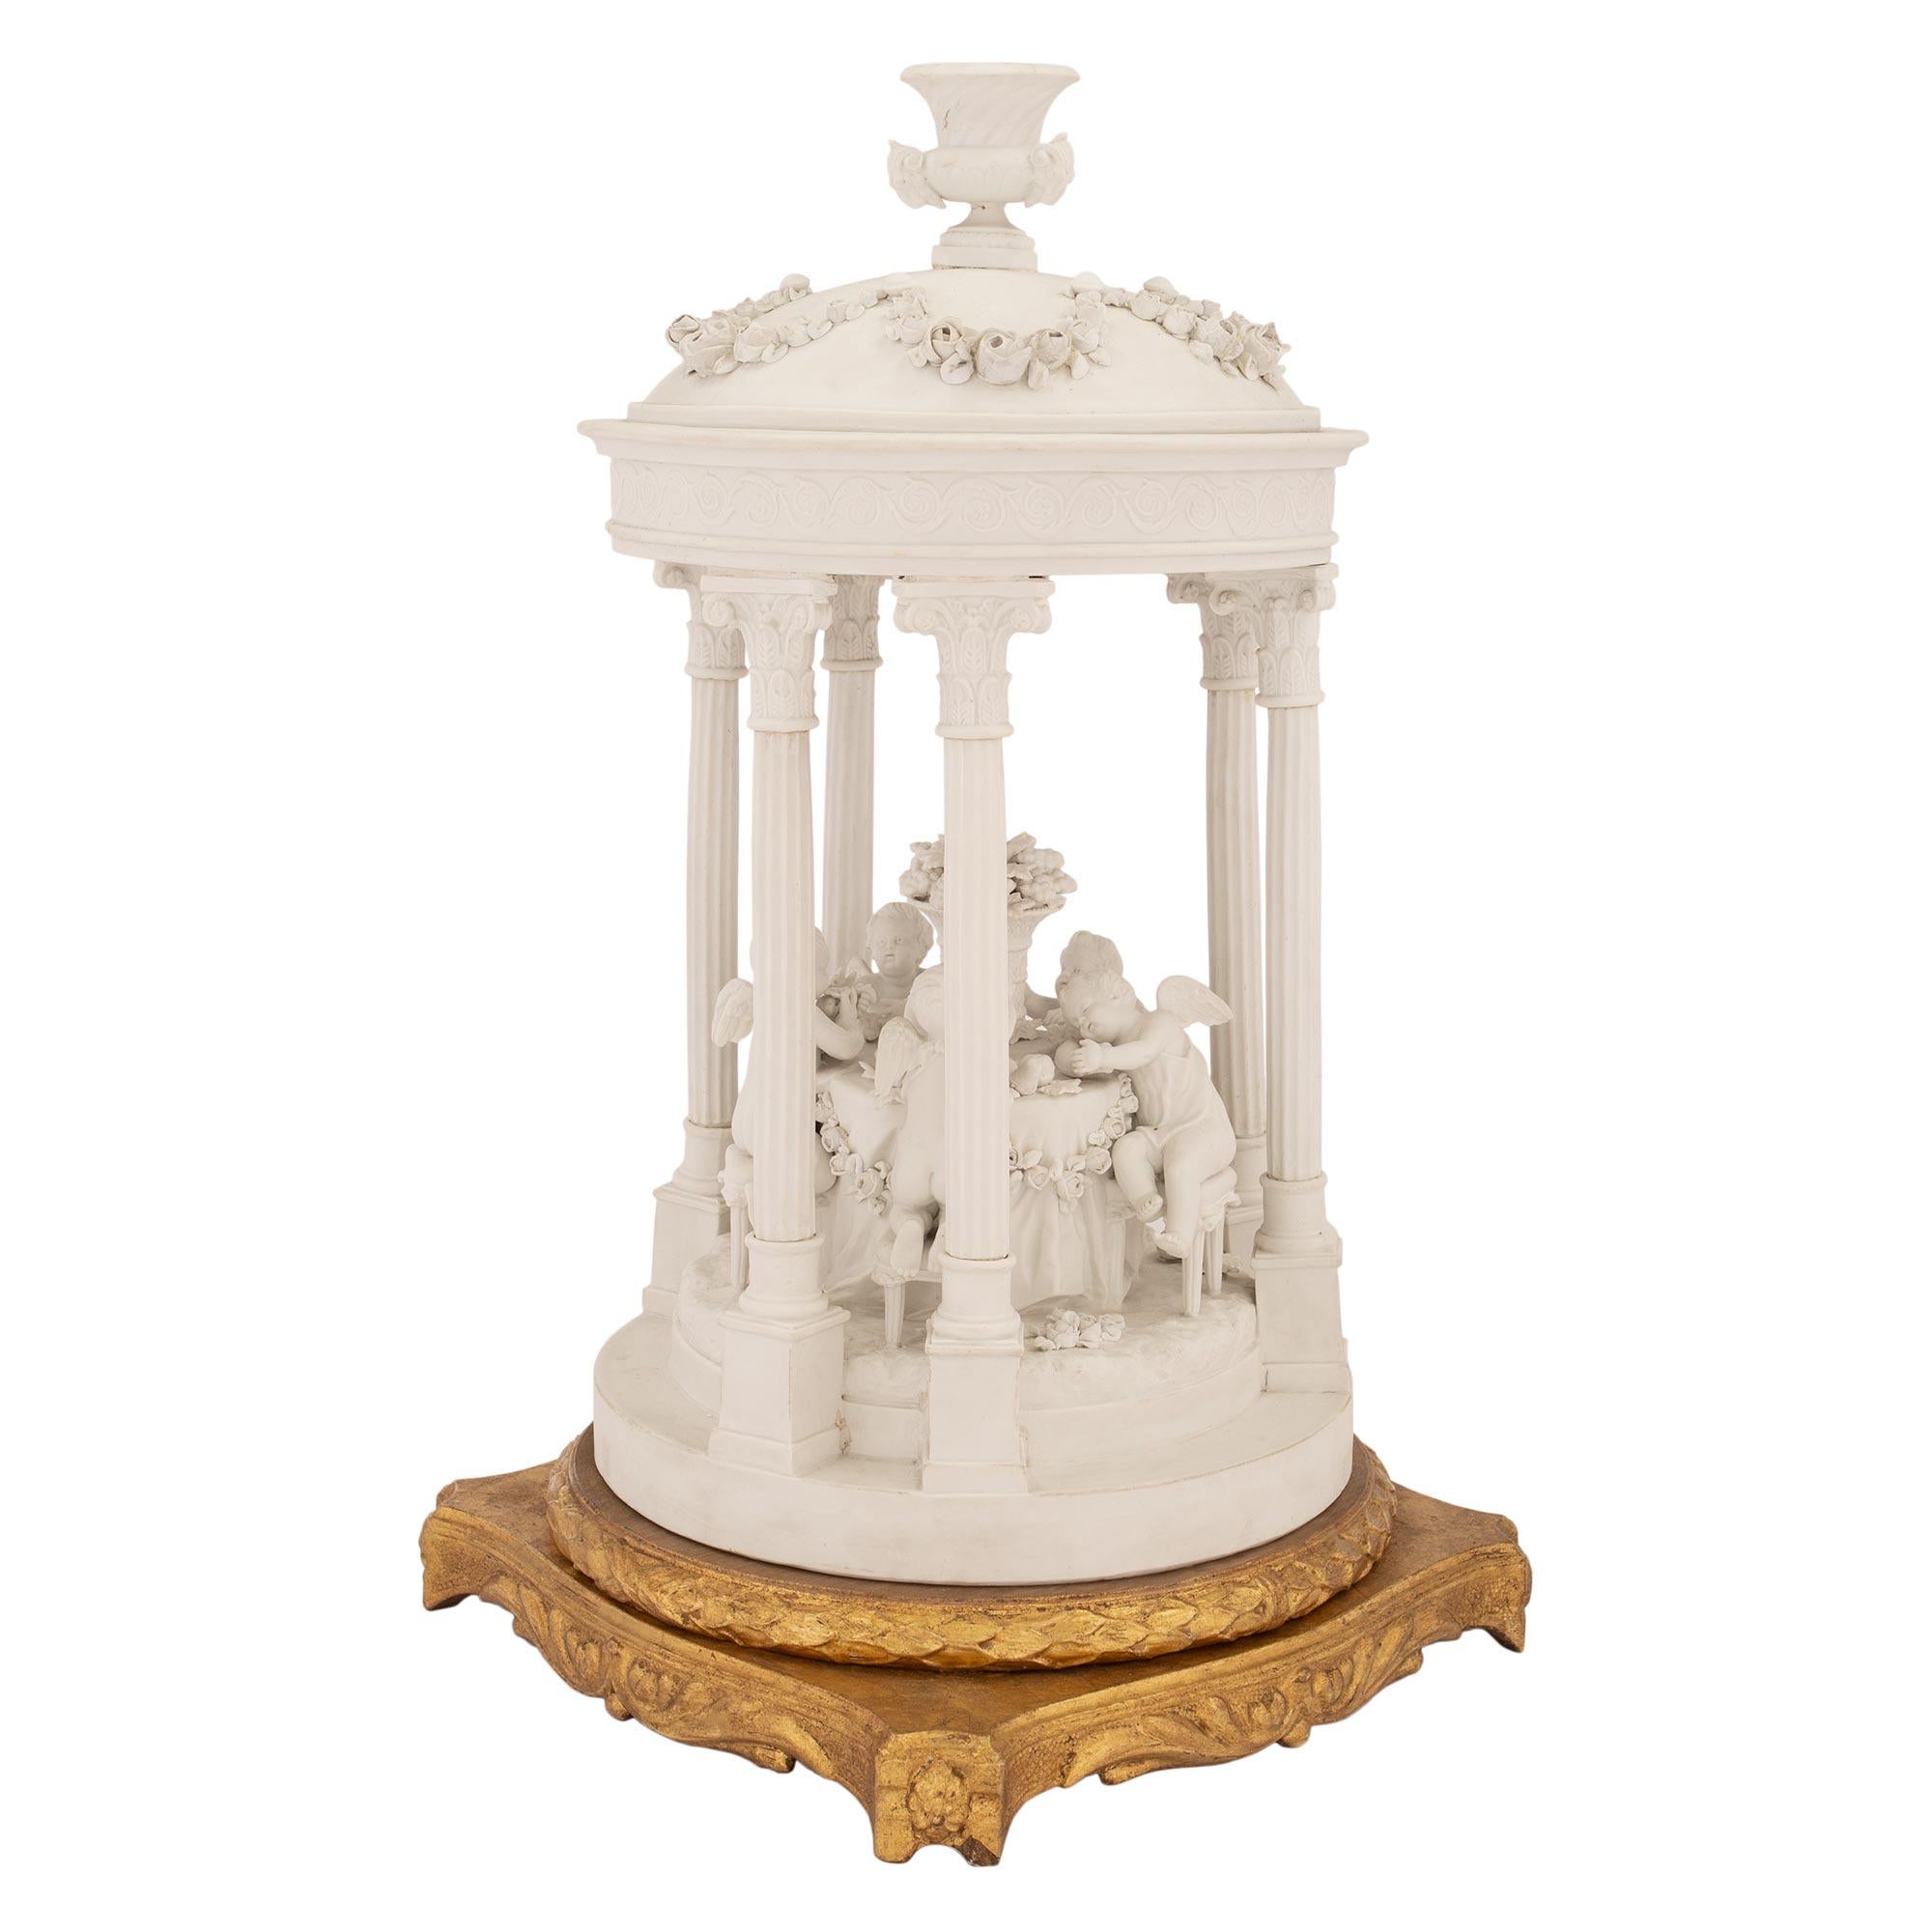 A sensational French mid 19th century Louis XVI st. Biscuit de Sèvres and giltwood centerpiece. The statue is raised by a richly detailed square giltwood base with slightly curved sides. Each side are decorated scrolled acanthus leaves below a fine